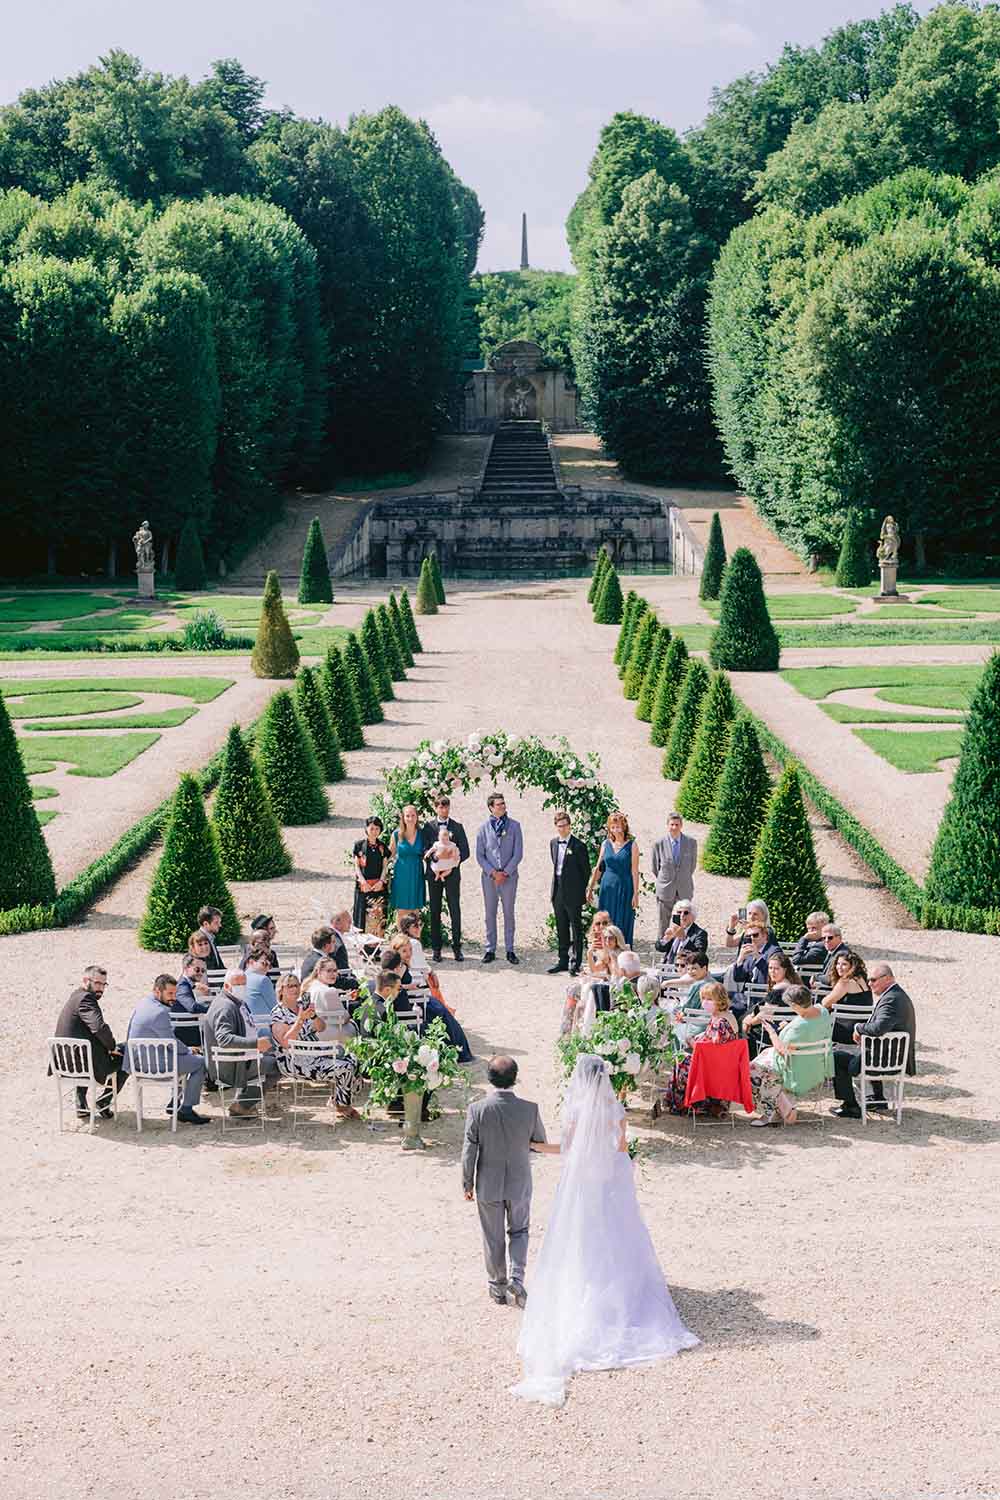 beautifull ceremony at the chateau vilette